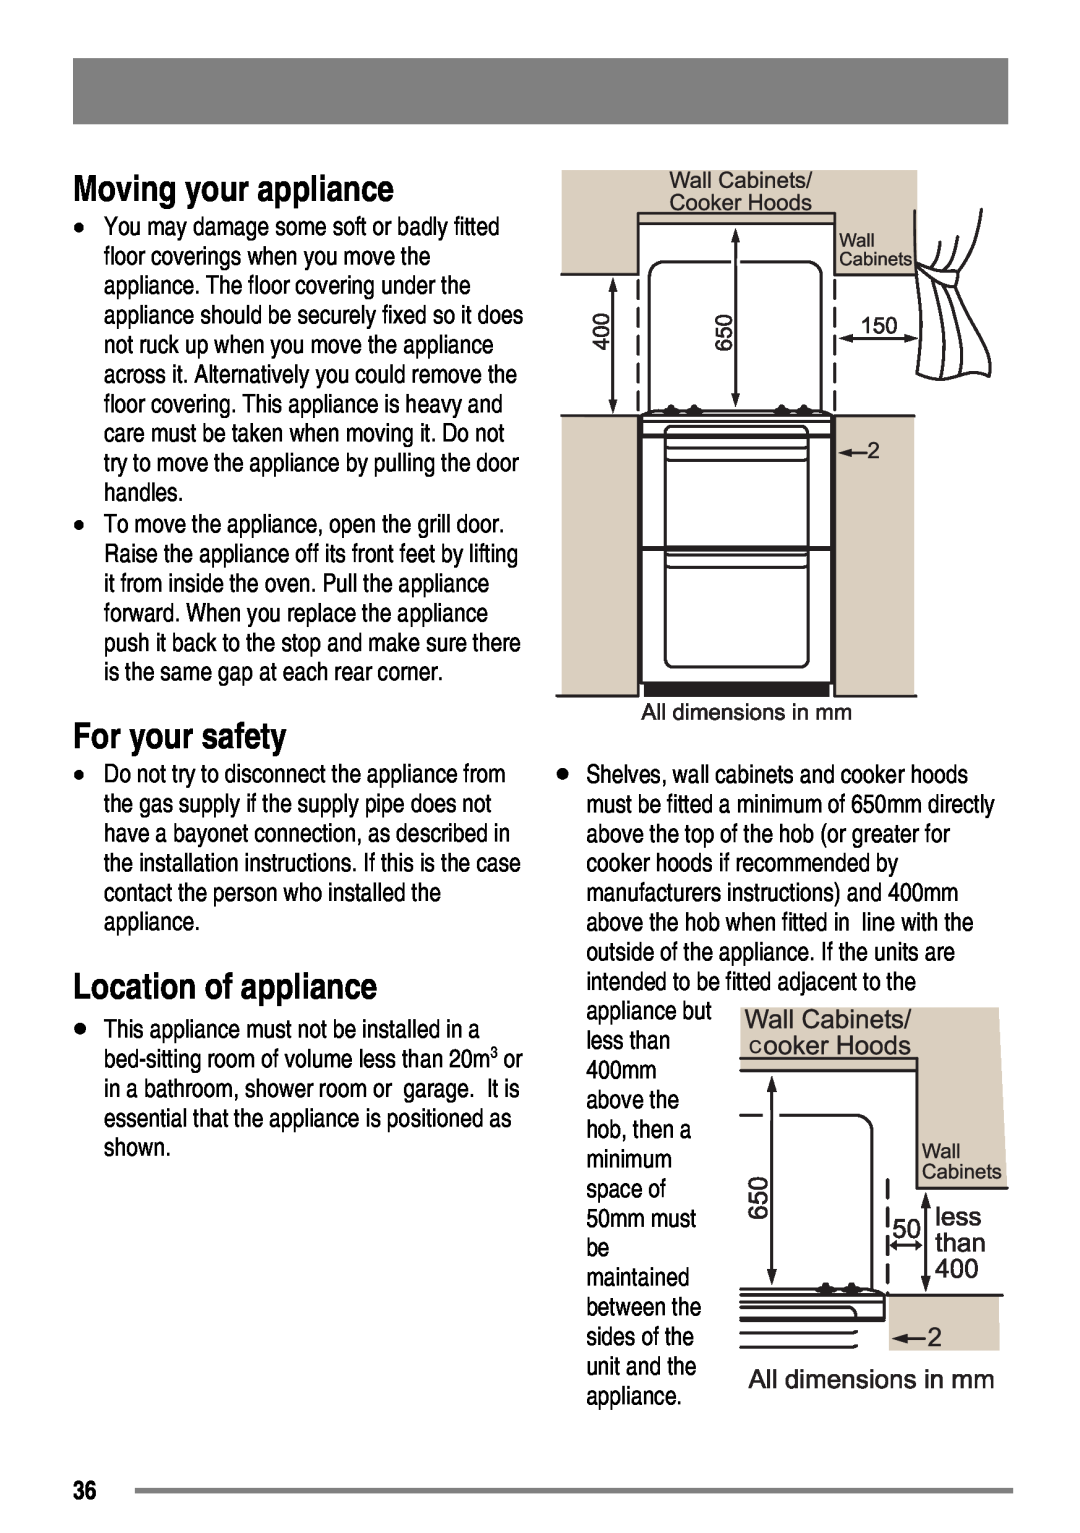 Zanussi ZKG6040 user manual Moving your appliance, For your safety, Location of appliance, above the 